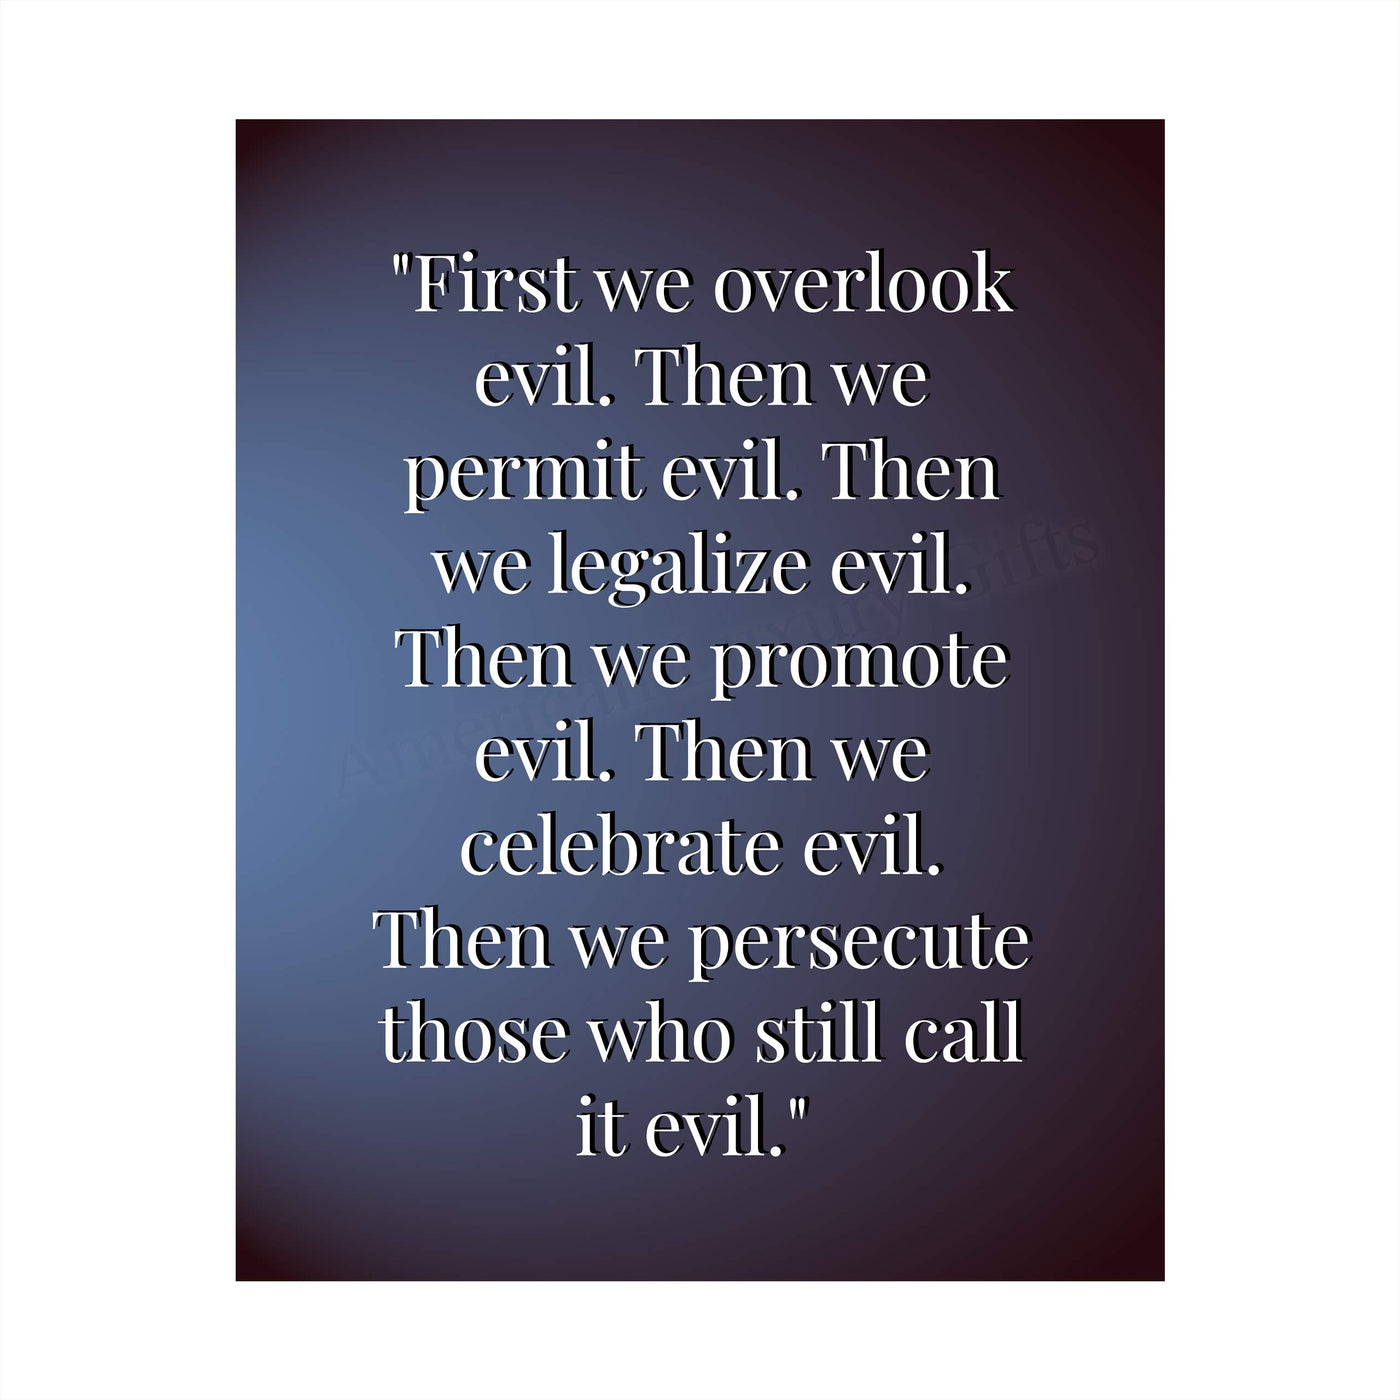 First We Overlook Evil-Then We Permit Evil- 8 x 10" Political Freedom Wall Decor-Ready to Frame. Inspirational Pro-American Poster Print for Home-Office-Garage-Bar-Cave Decor. Great Reminder!